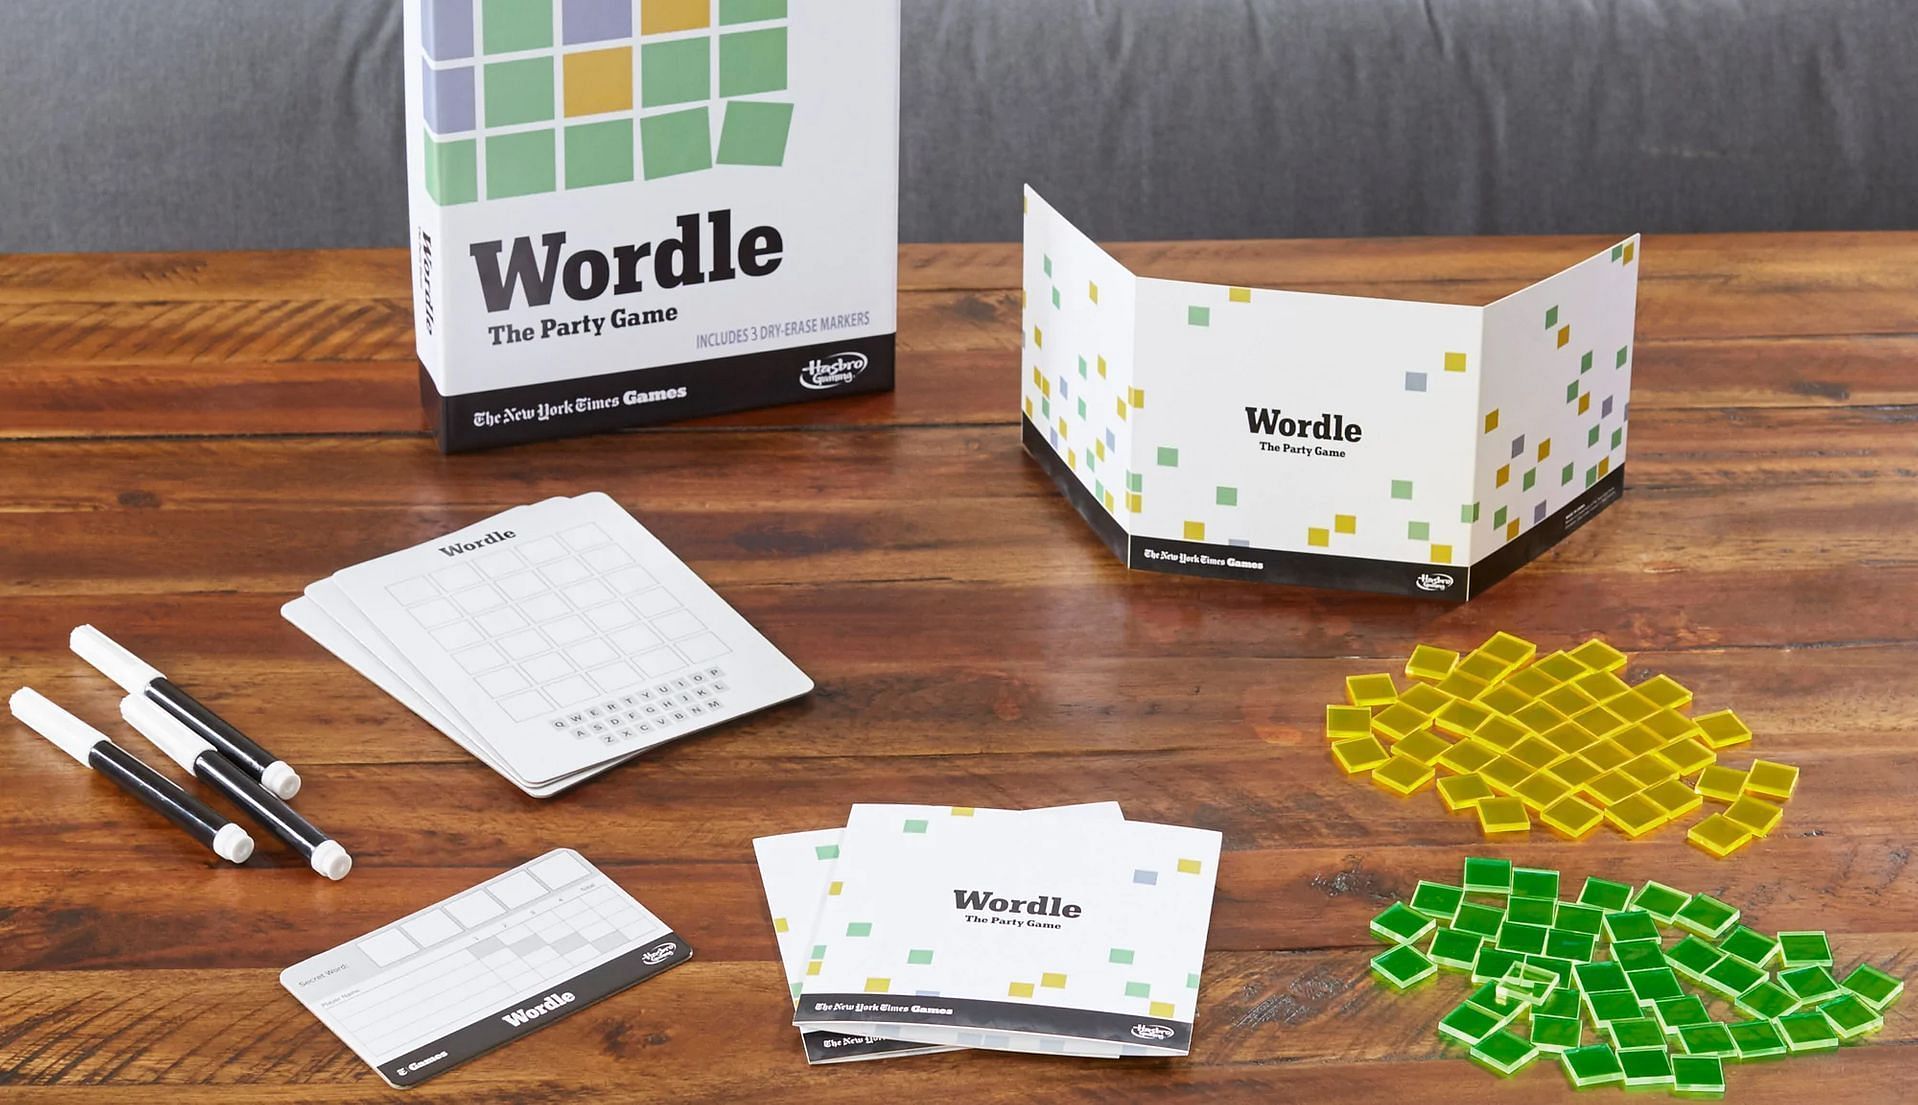 Wordle Board Game, all set to hit the shelves in October 2022, will retail for $19.99. (Image via New York Times)